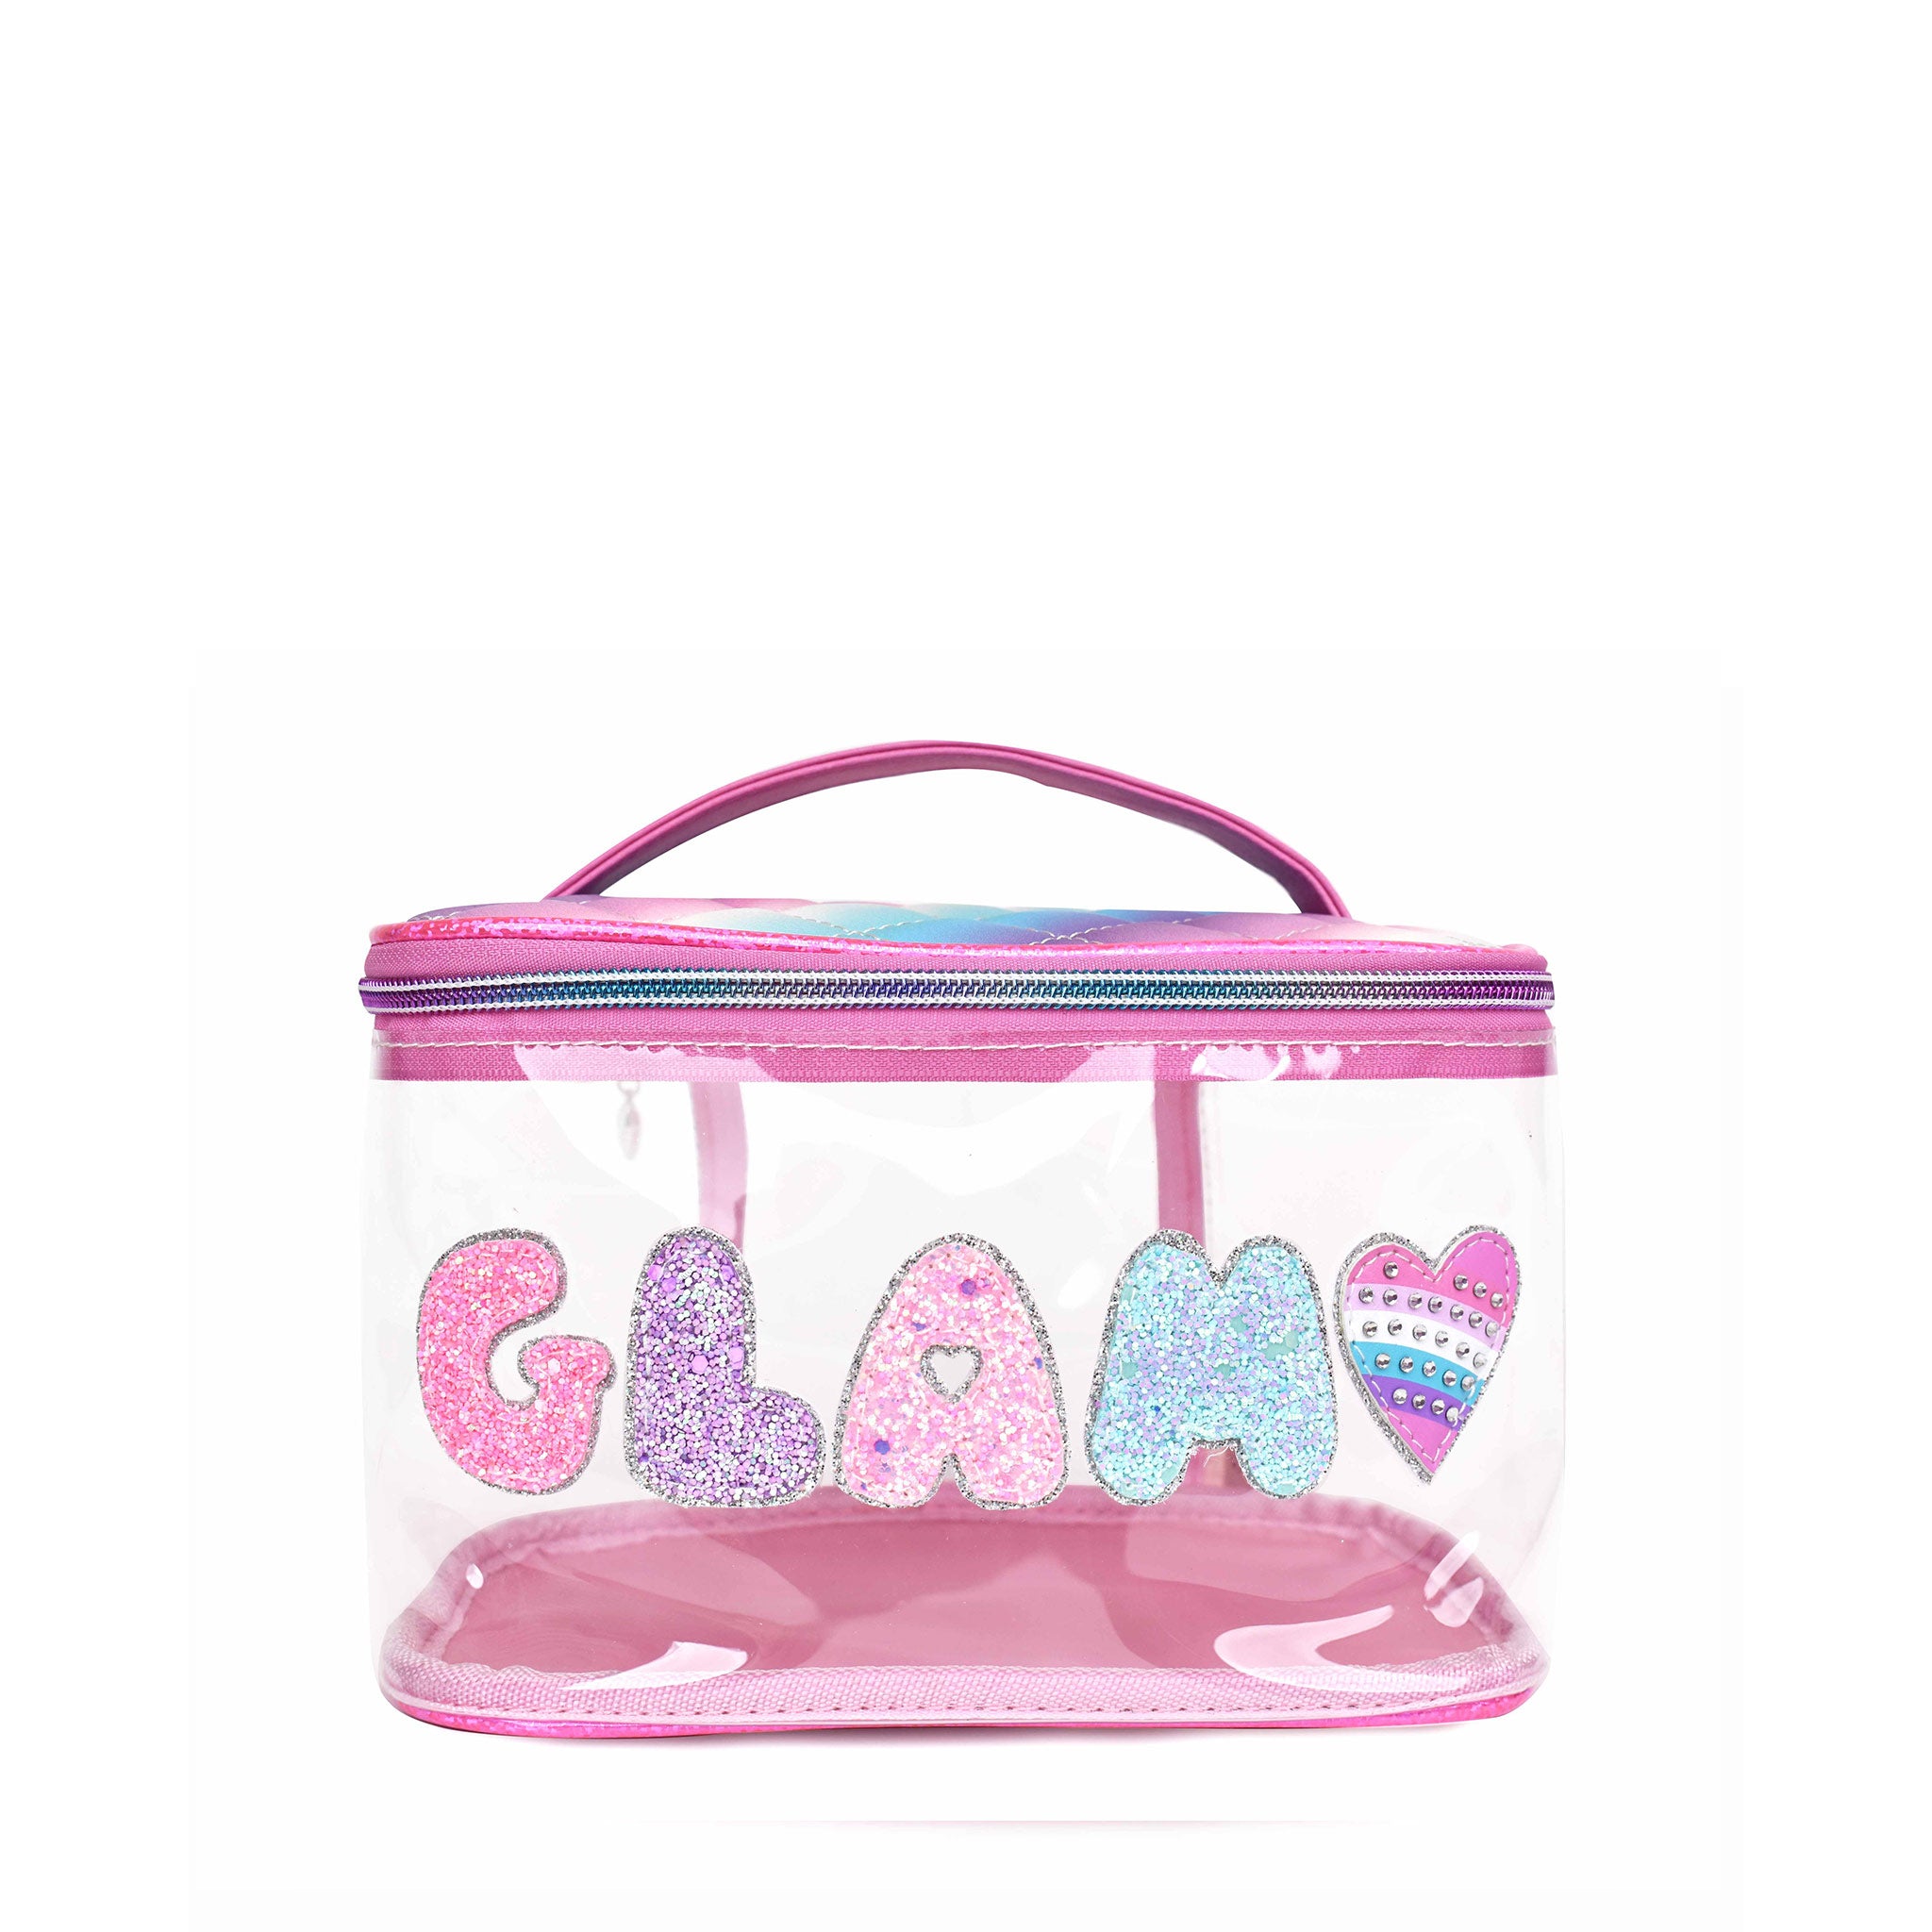 Front view of a clear train case with glitter bubble letters 'GLAM' and rhinestone heart appliqué 